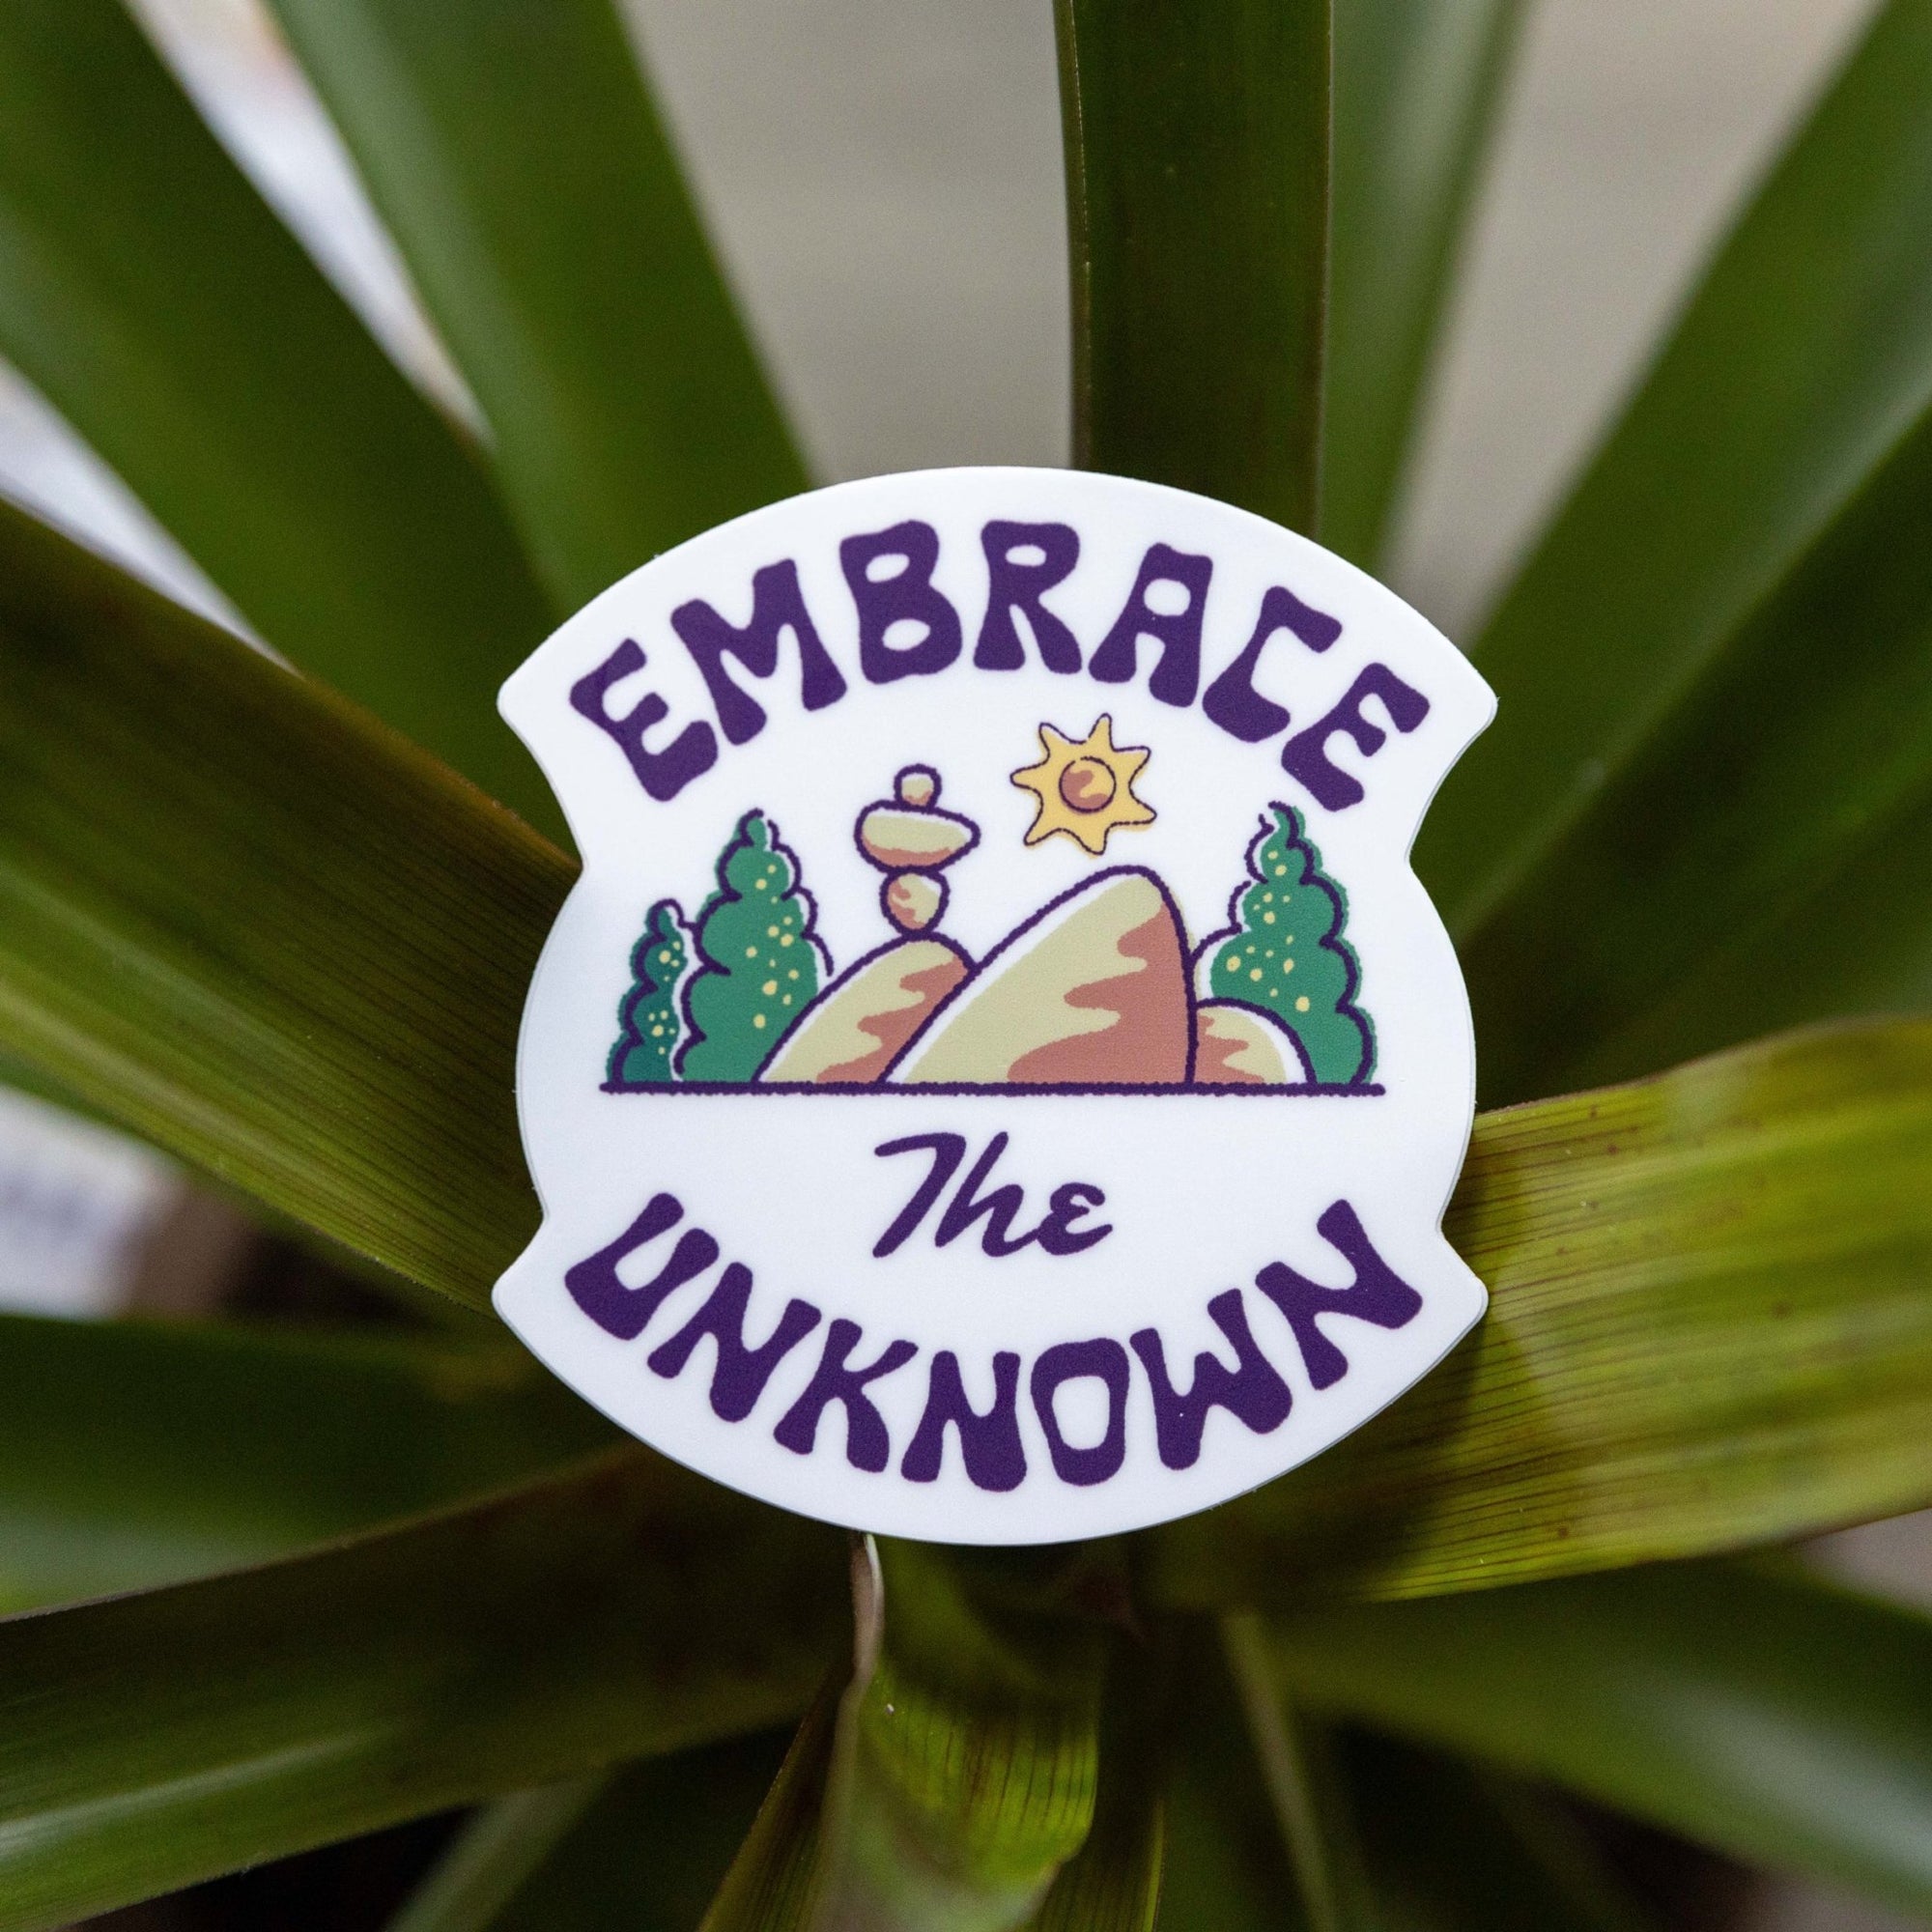 Embrace the Unknown - menottees